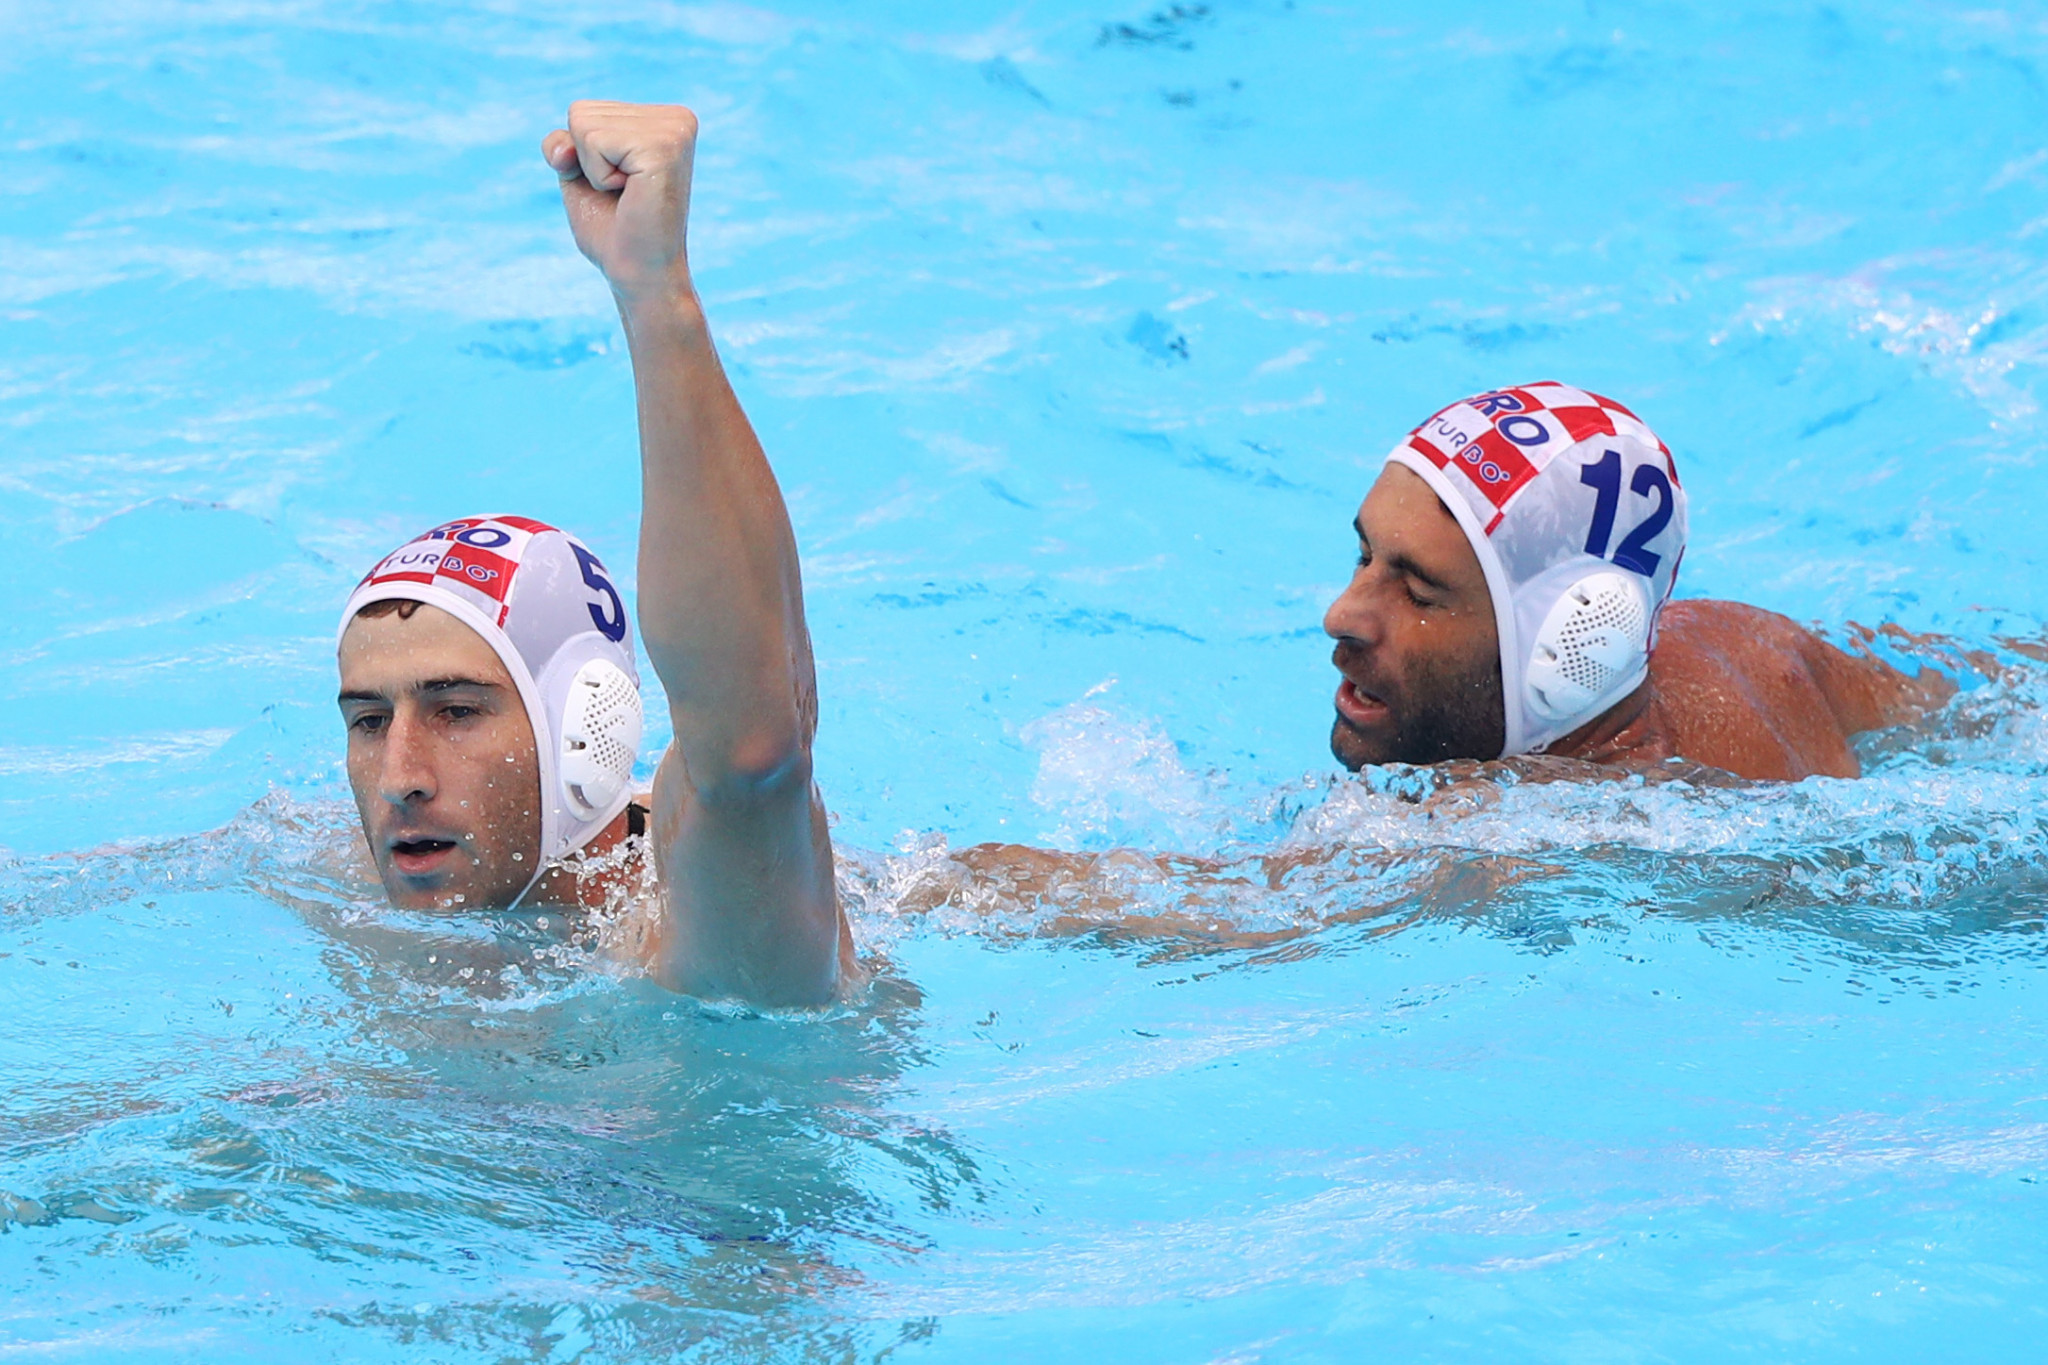 Croatia has started the Tokyo 2020 qualification tournament with a win ©Getty Images